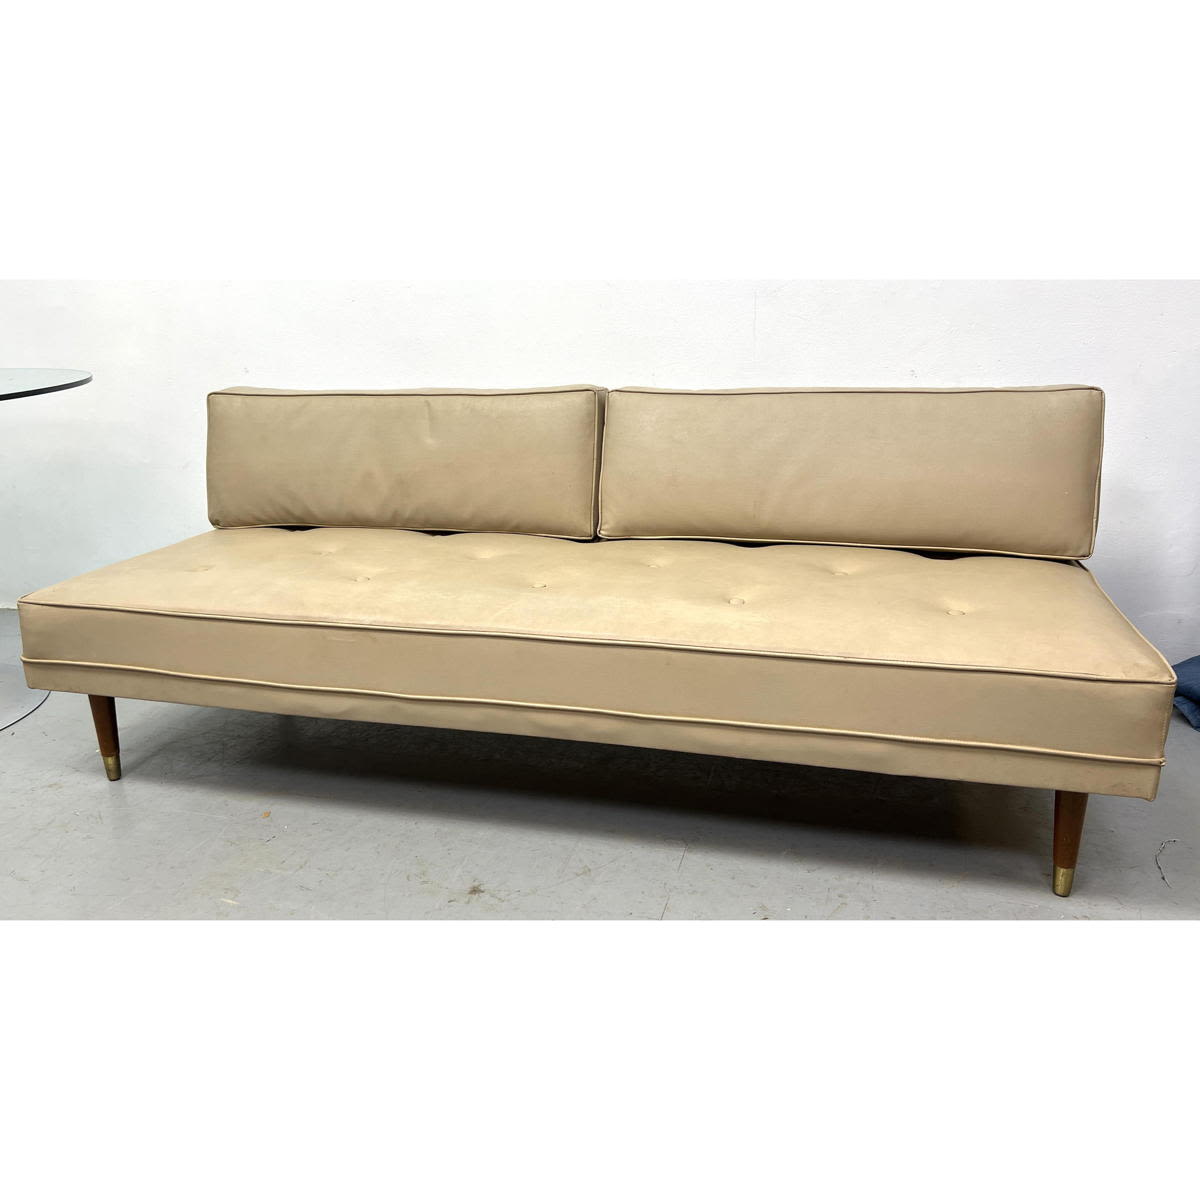 Modern Day Bed Sofa. Wood Plank Back